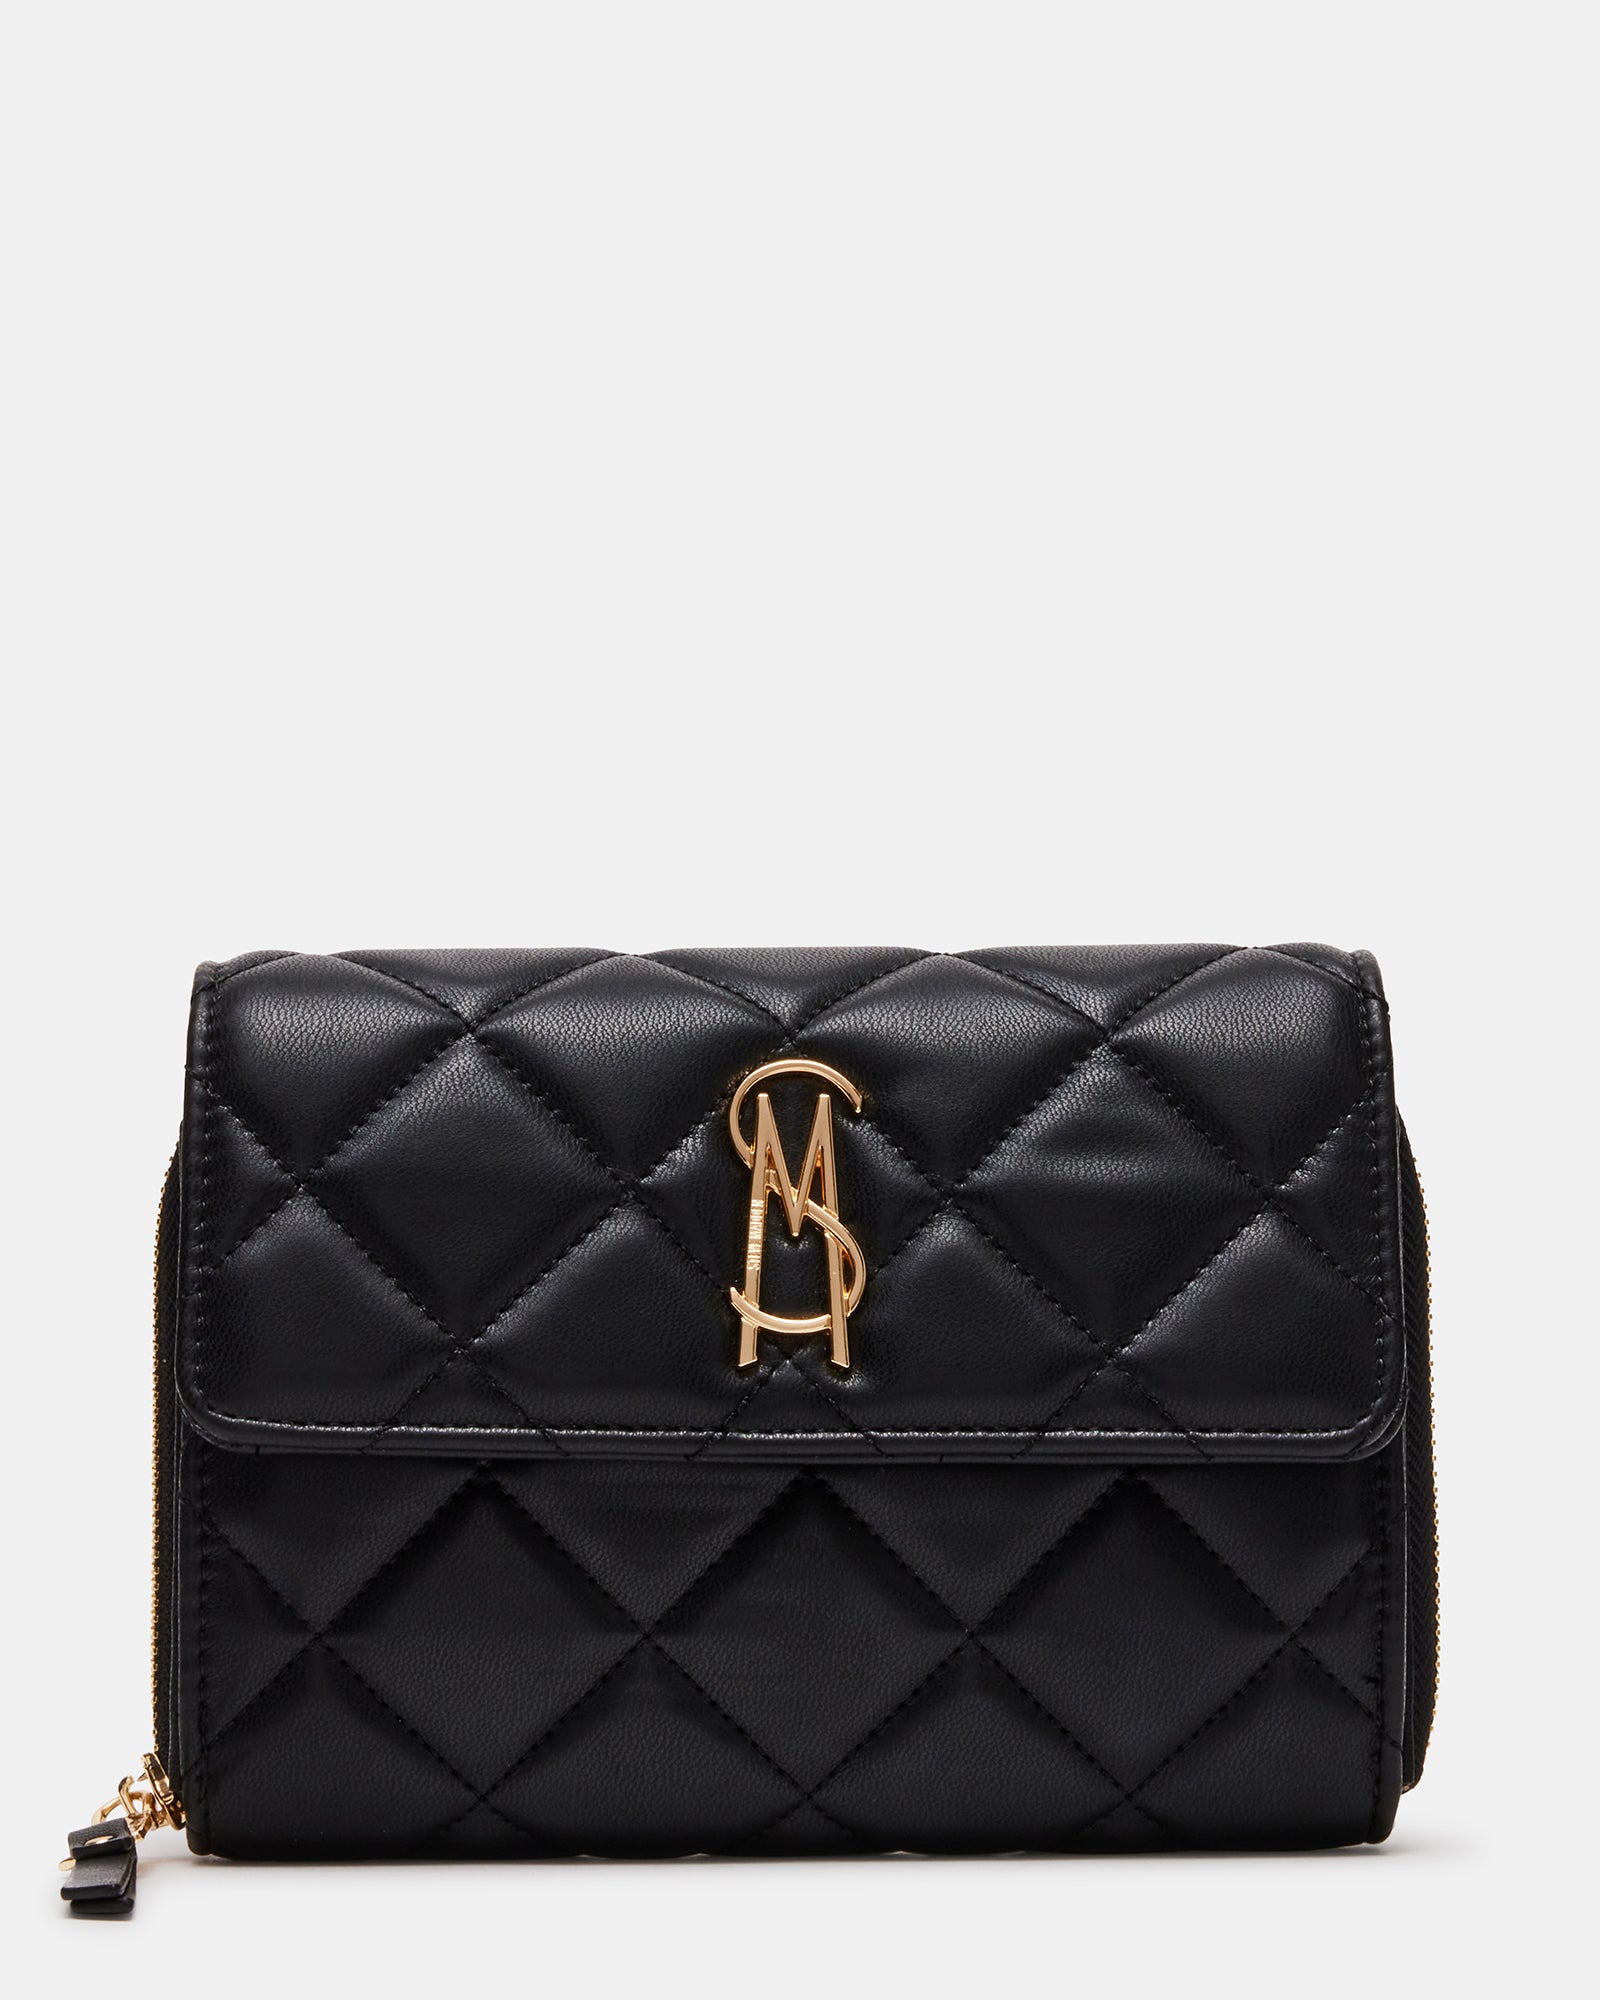 ER.Roulour Quilted Crossbody Bags for Women, Trendy Roomy Chain